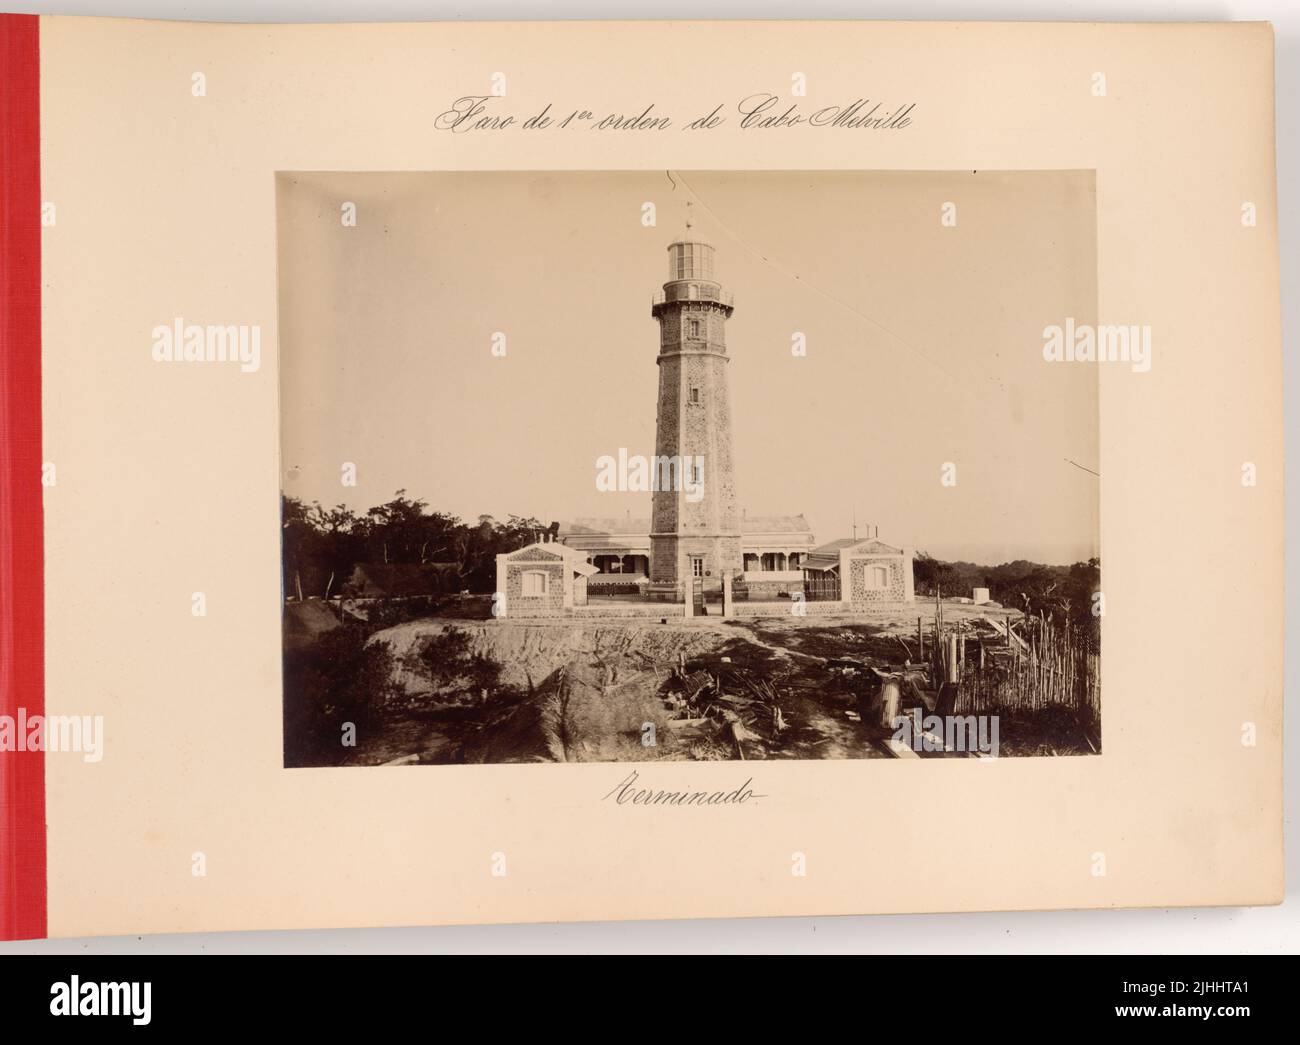 Misc - Cabo Melville. Presented to Major Charles McClure, Paymaster, U.S.A. The Lighthouses of the Philippines, by Manuel de Iriarte. Manila, April 17, 1899. Faro de 1st orden de Cabo Melville. Terminado. Stock Photo